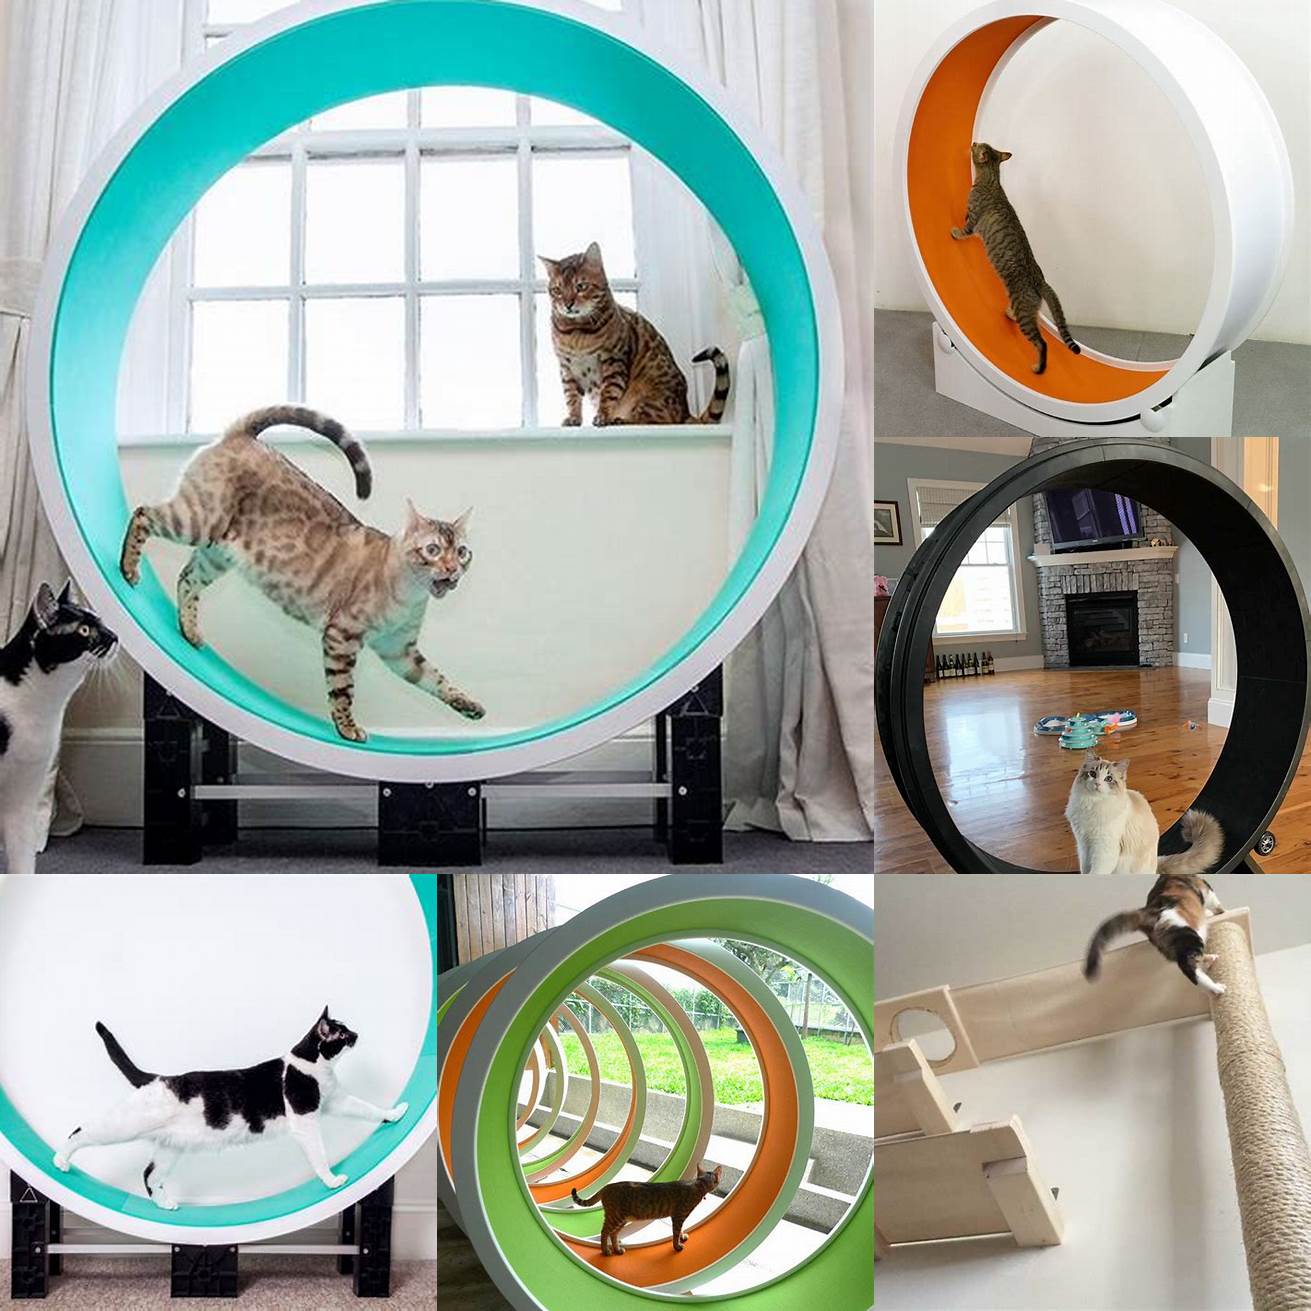 Exercise - Indoor cats need exercise too A cat door for screen provides your feline friend with the opportunity to explore the great outdoors and get the exercise they need to stay healthy